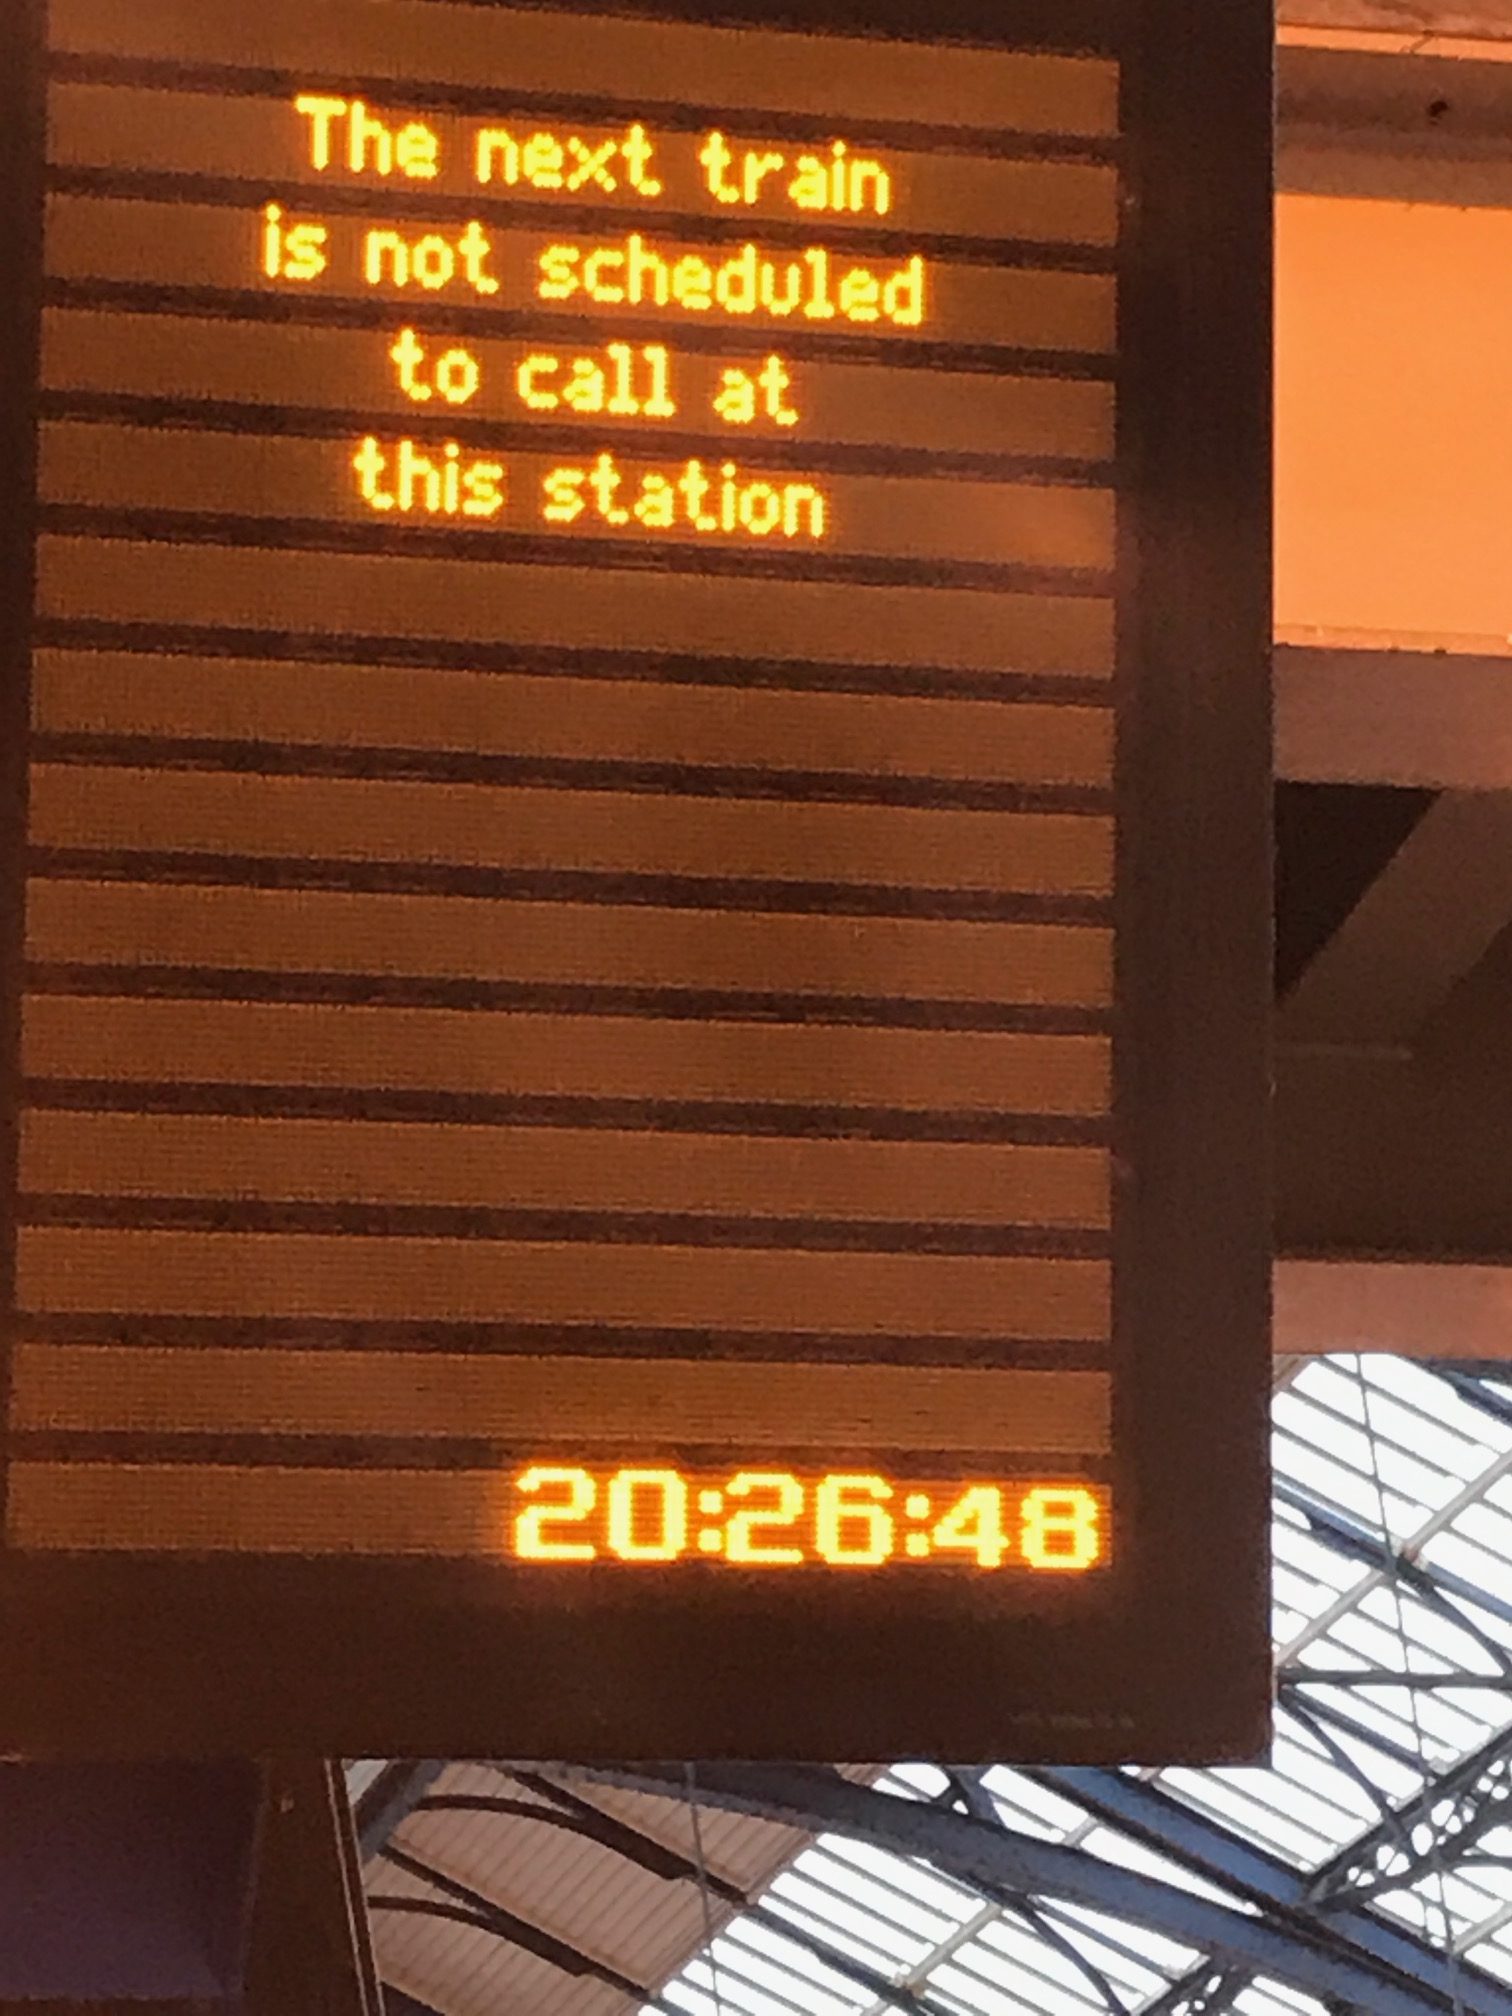 Brighton: Sign reads: "The next train is not scheduled to call at this station"!